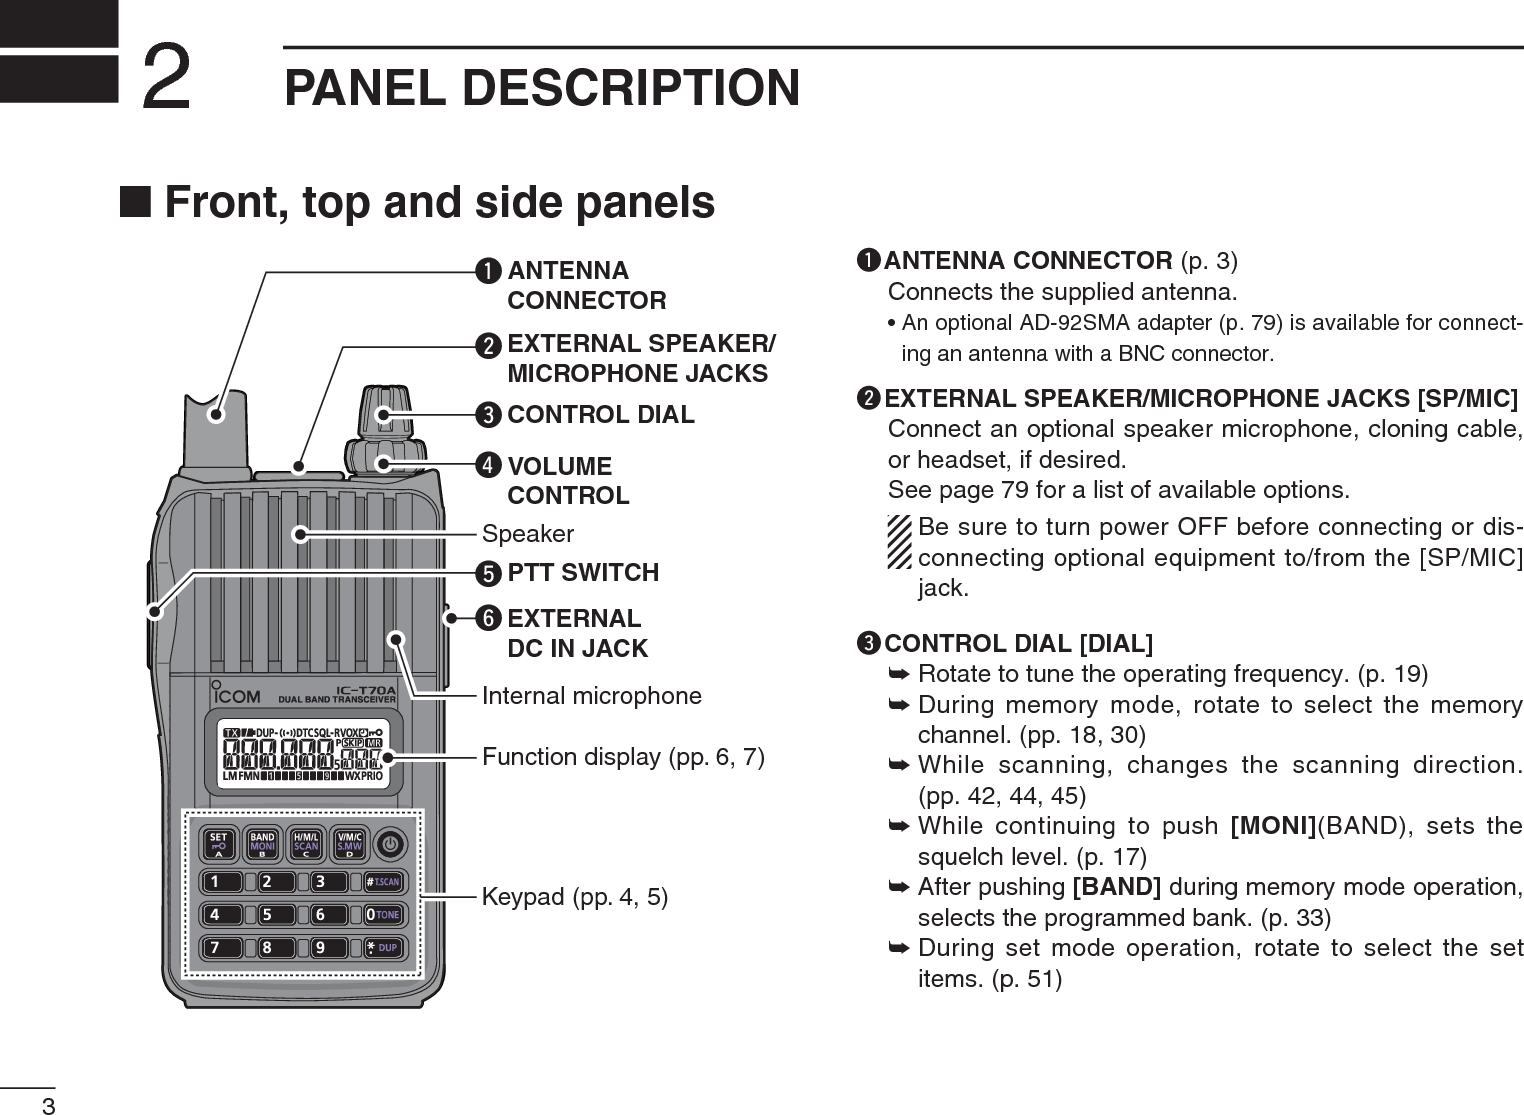 3PANEL DESCRIPTION2N Front, top and side panelsSpeakerANTENNACONNECTOREXTERNALDC IN JACKVOLUMECONTROLCONTROL DIALEXTERNAL SPEAKER/MICROPHONE JACKSKeypad (pp. 4, 5)Internal microphoneFunction display (pp. 6, 7)PTT SWITCHerywqtqANTENNA CONNECTOR (p. 3)Connects the supplied antenna.• An optional AD-92SMA adapter (p. 79) is available for connect-ing an antenna with a BNC connector.wEXTERNAL SPEAKER/MICROPHONE JACKS [SP/MIC]Connect an optional speaker microphone, cloning cable, or headset, if desired.See page 79 for a list of available options.Be sure to turn power OFF before connecting or dis-connecting optional equipment to/from the [SP/MIC] jack.eCONTROL DIAL [DIAL]± Rotate to tune the operating frequency. (p. 19)±During memory mode, rotate to select the memory channel. (pp. 18, 30)±While scanning, changes the scanning direction. (pp. 42, 44, 45)±While continuing to push [MONI](BAND), sets the squelch level. (p. 17)±After pushing [BAND] during memory mode operation, selects the programmed bank. (p. 33)±During set mode operation, rotate to select the set items. (p. 51)